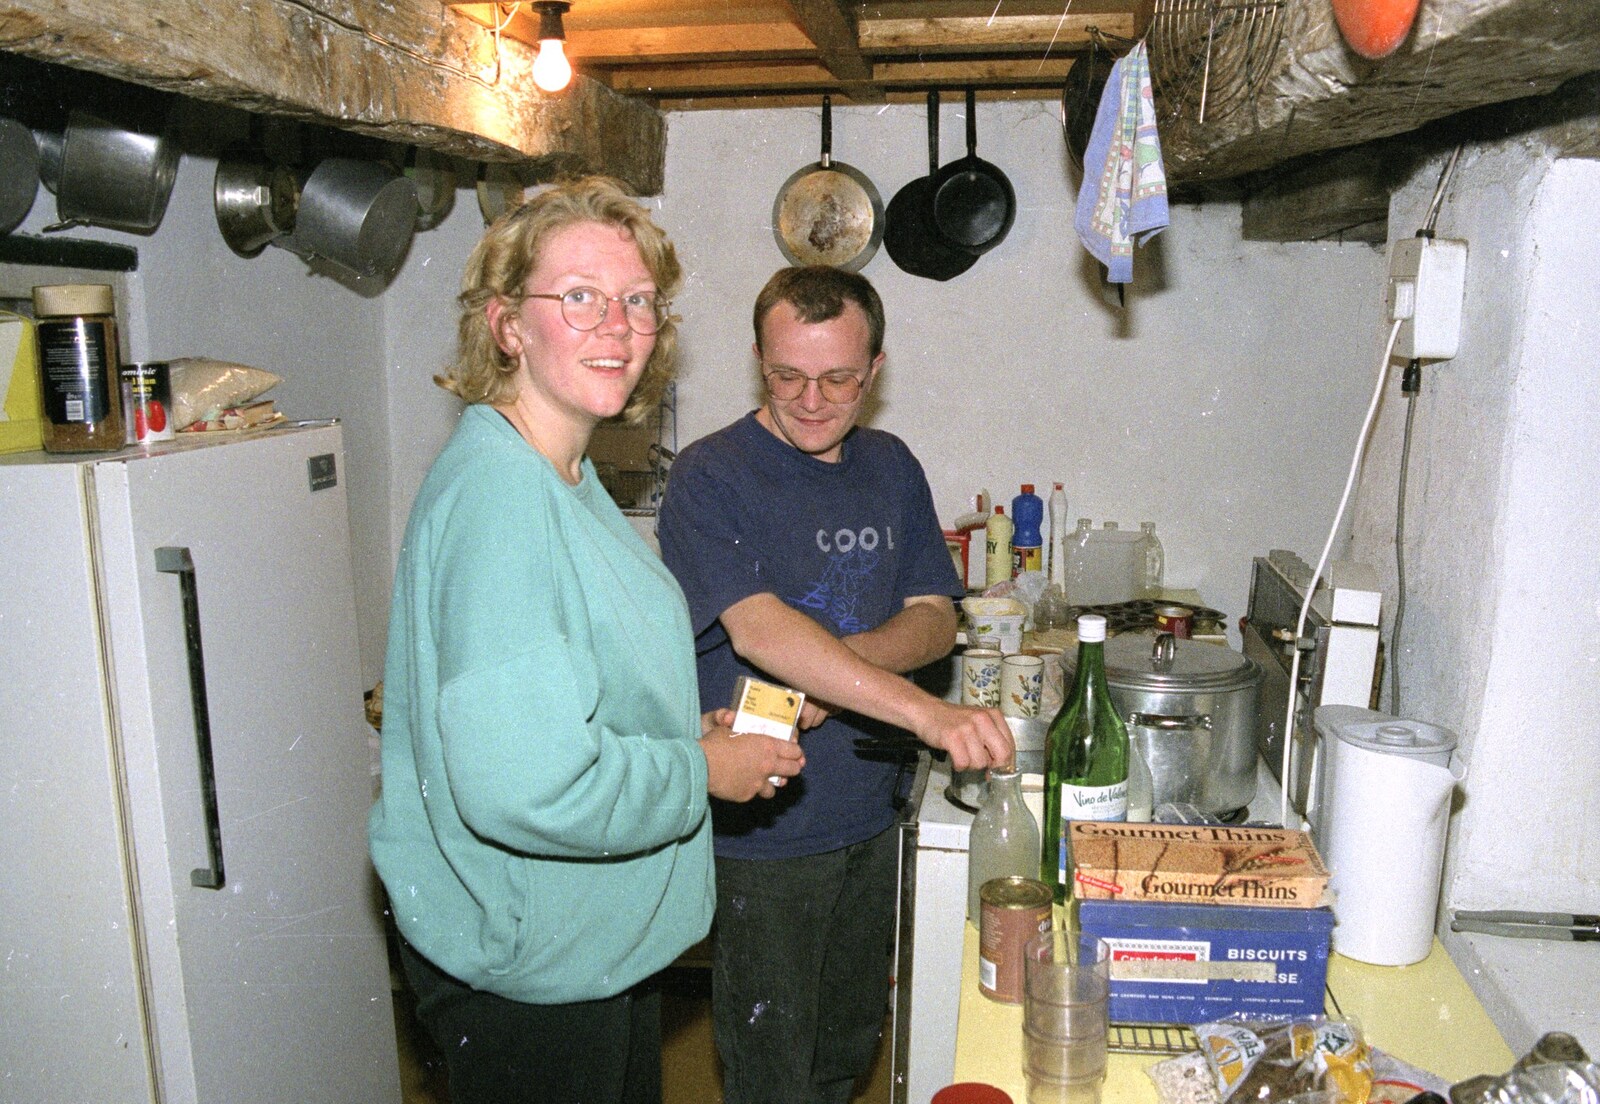 Liz's Party, Abergavenny, Monmouthshire, Wales - 4th August 1990: Liz and Hamish in the scullery